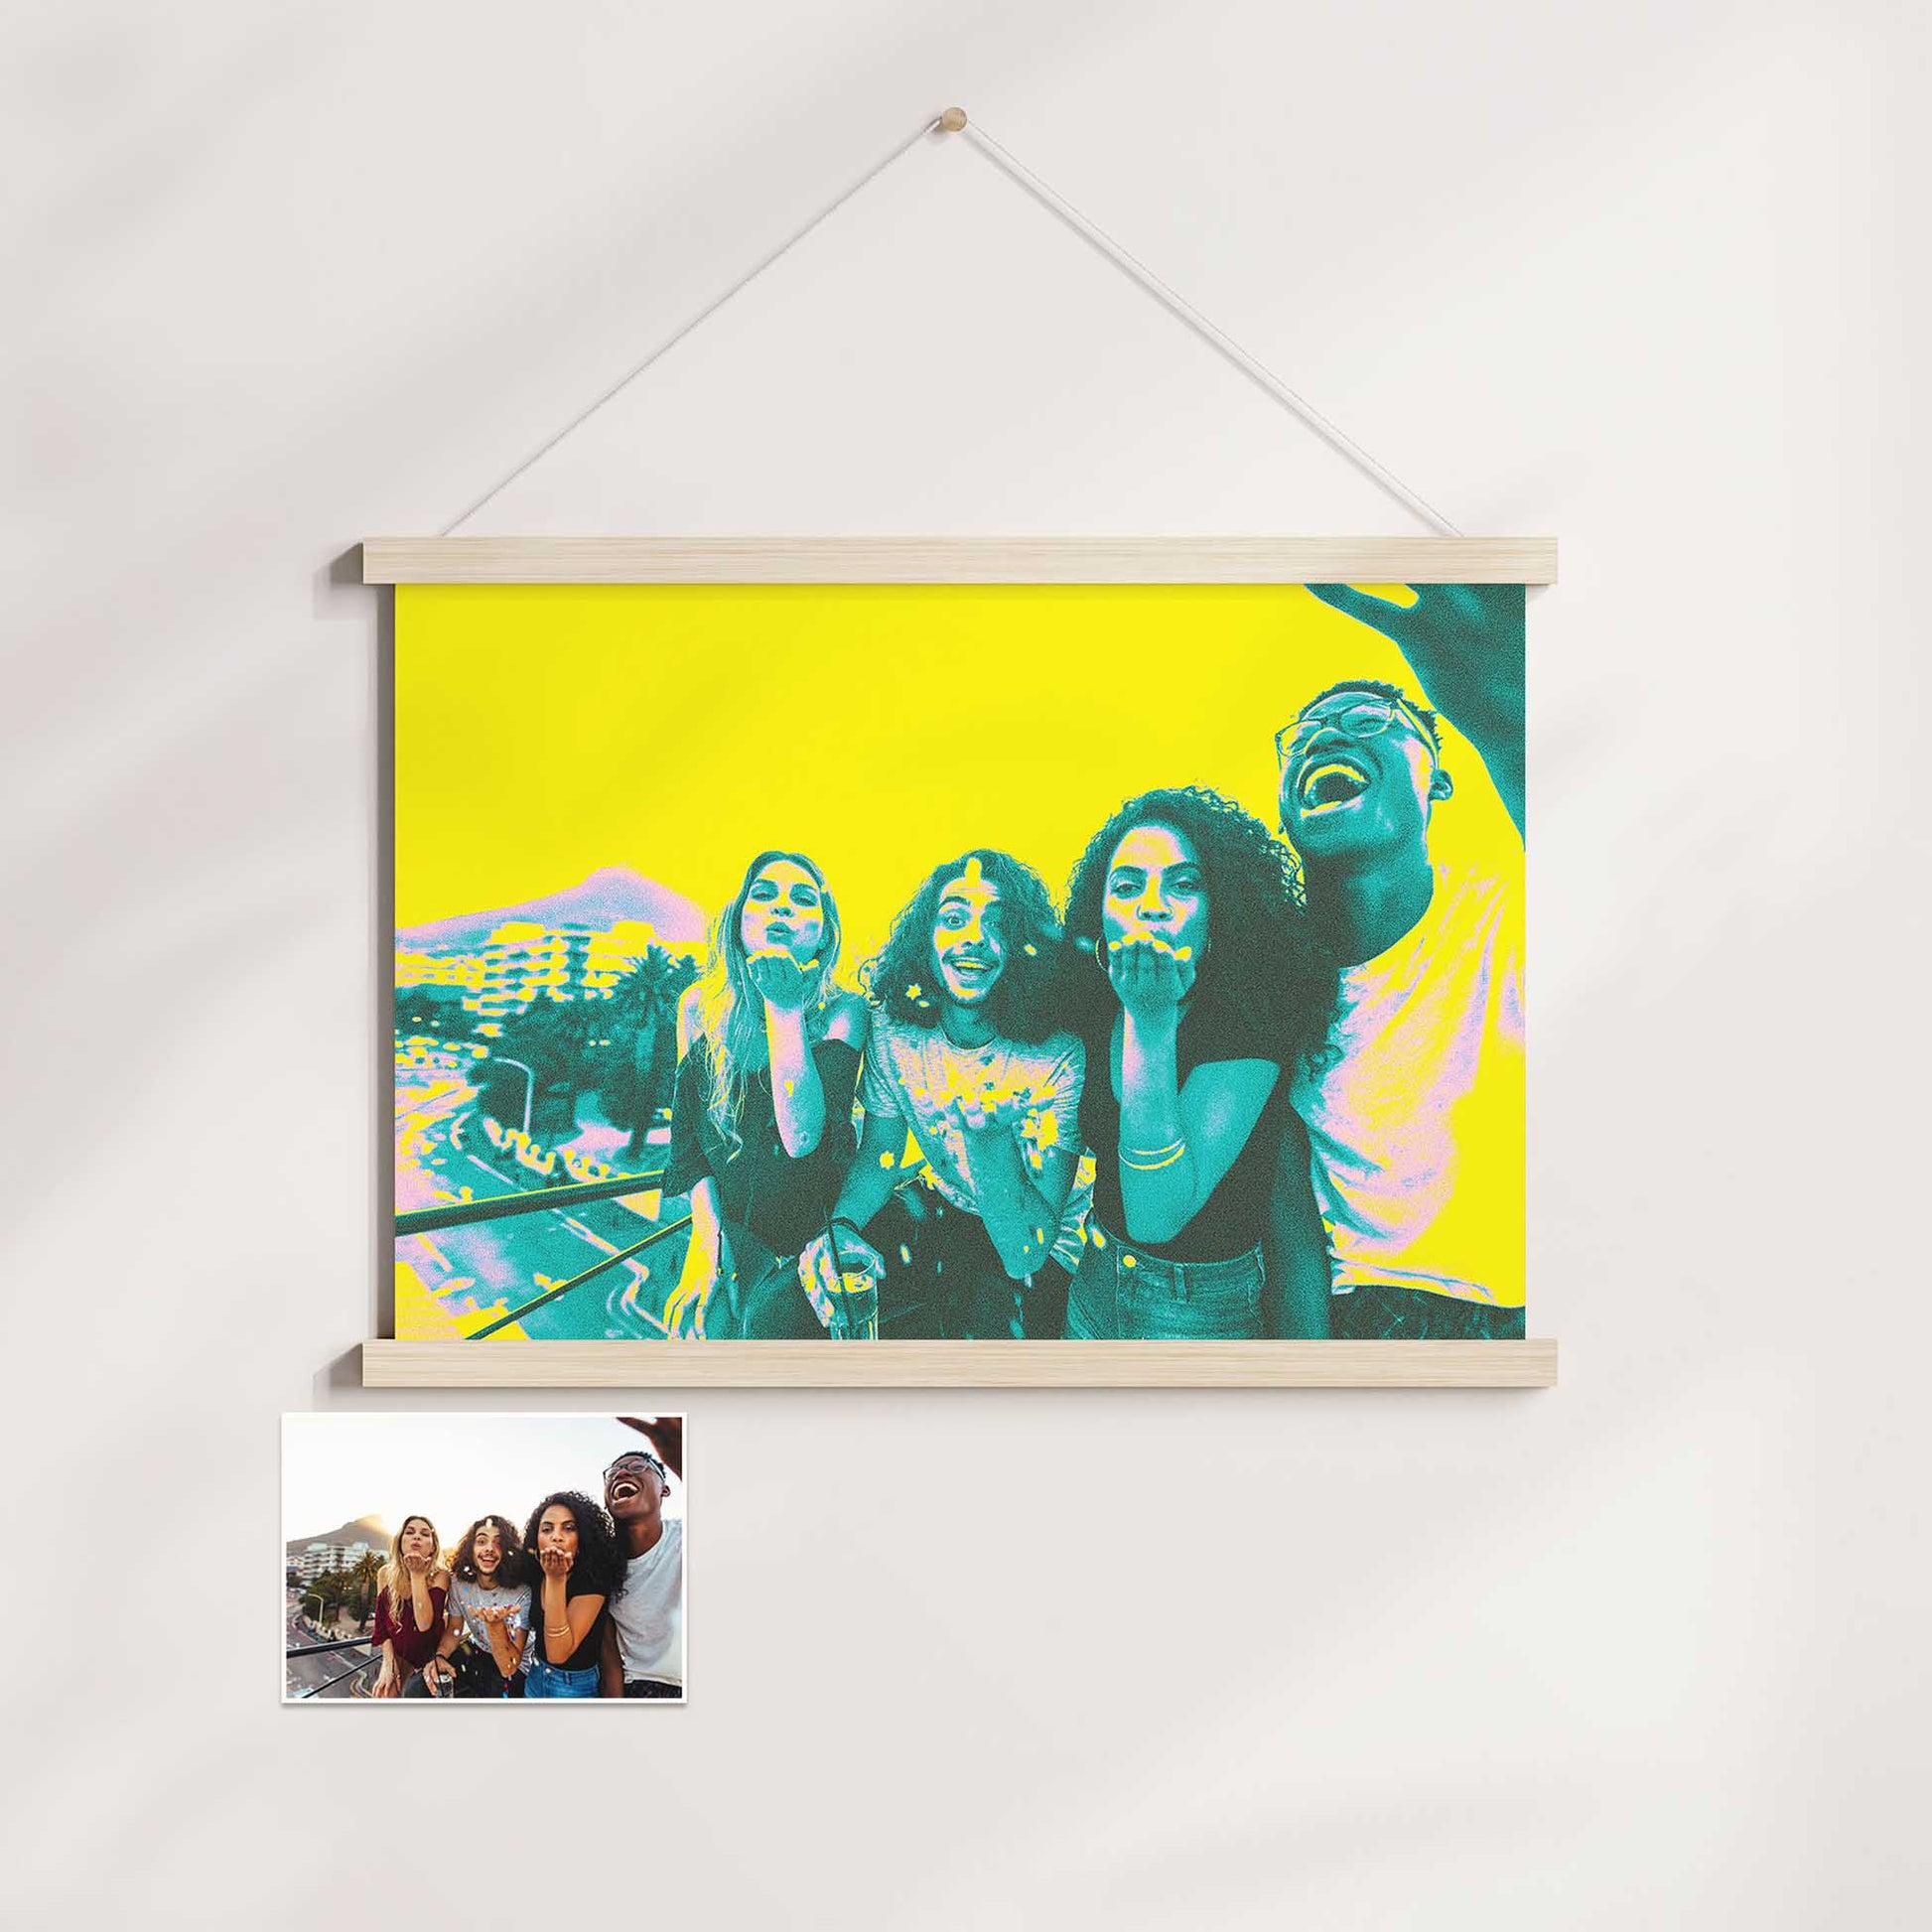 Add a touch of texture and a splash of fun to your walls with our Personalised Acid Colours Poster Hanger. Whether you're hosting a lively party or seeking bold interior design statements, this print, available in yellow, green, teal